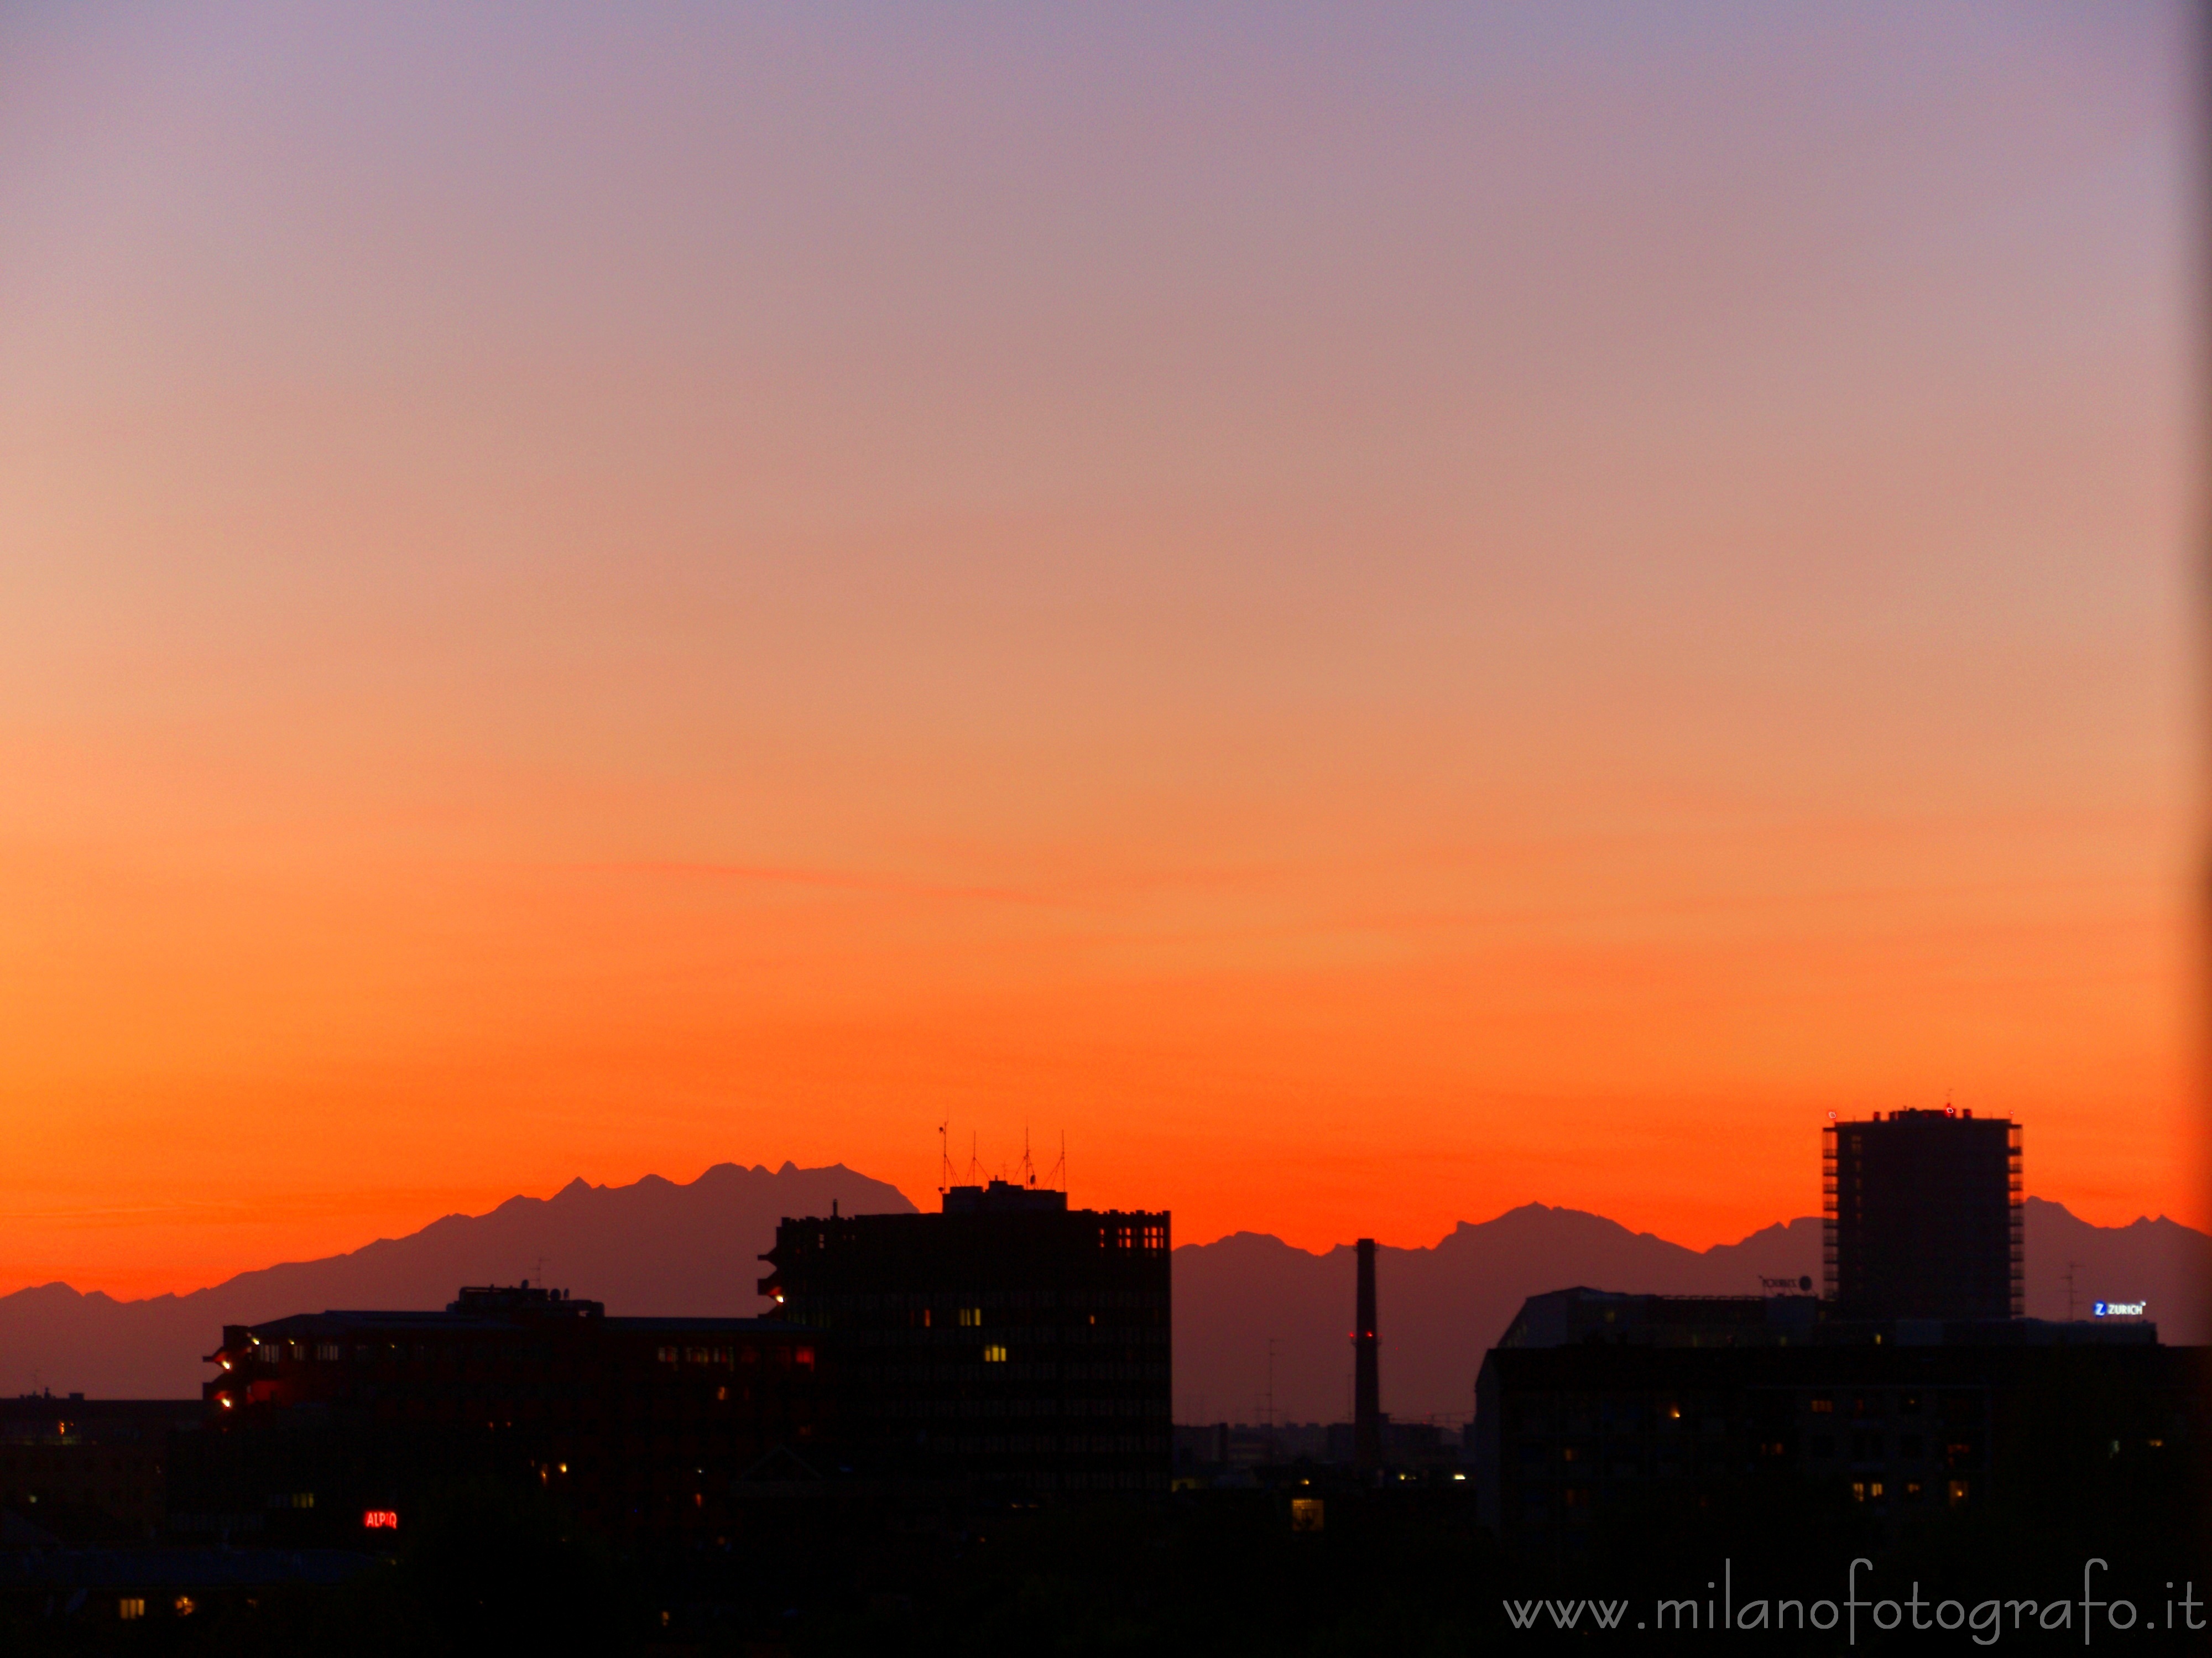 Milan (Italy): Sunset with Mount Rosa and Milano in the background - Milan (Italy)